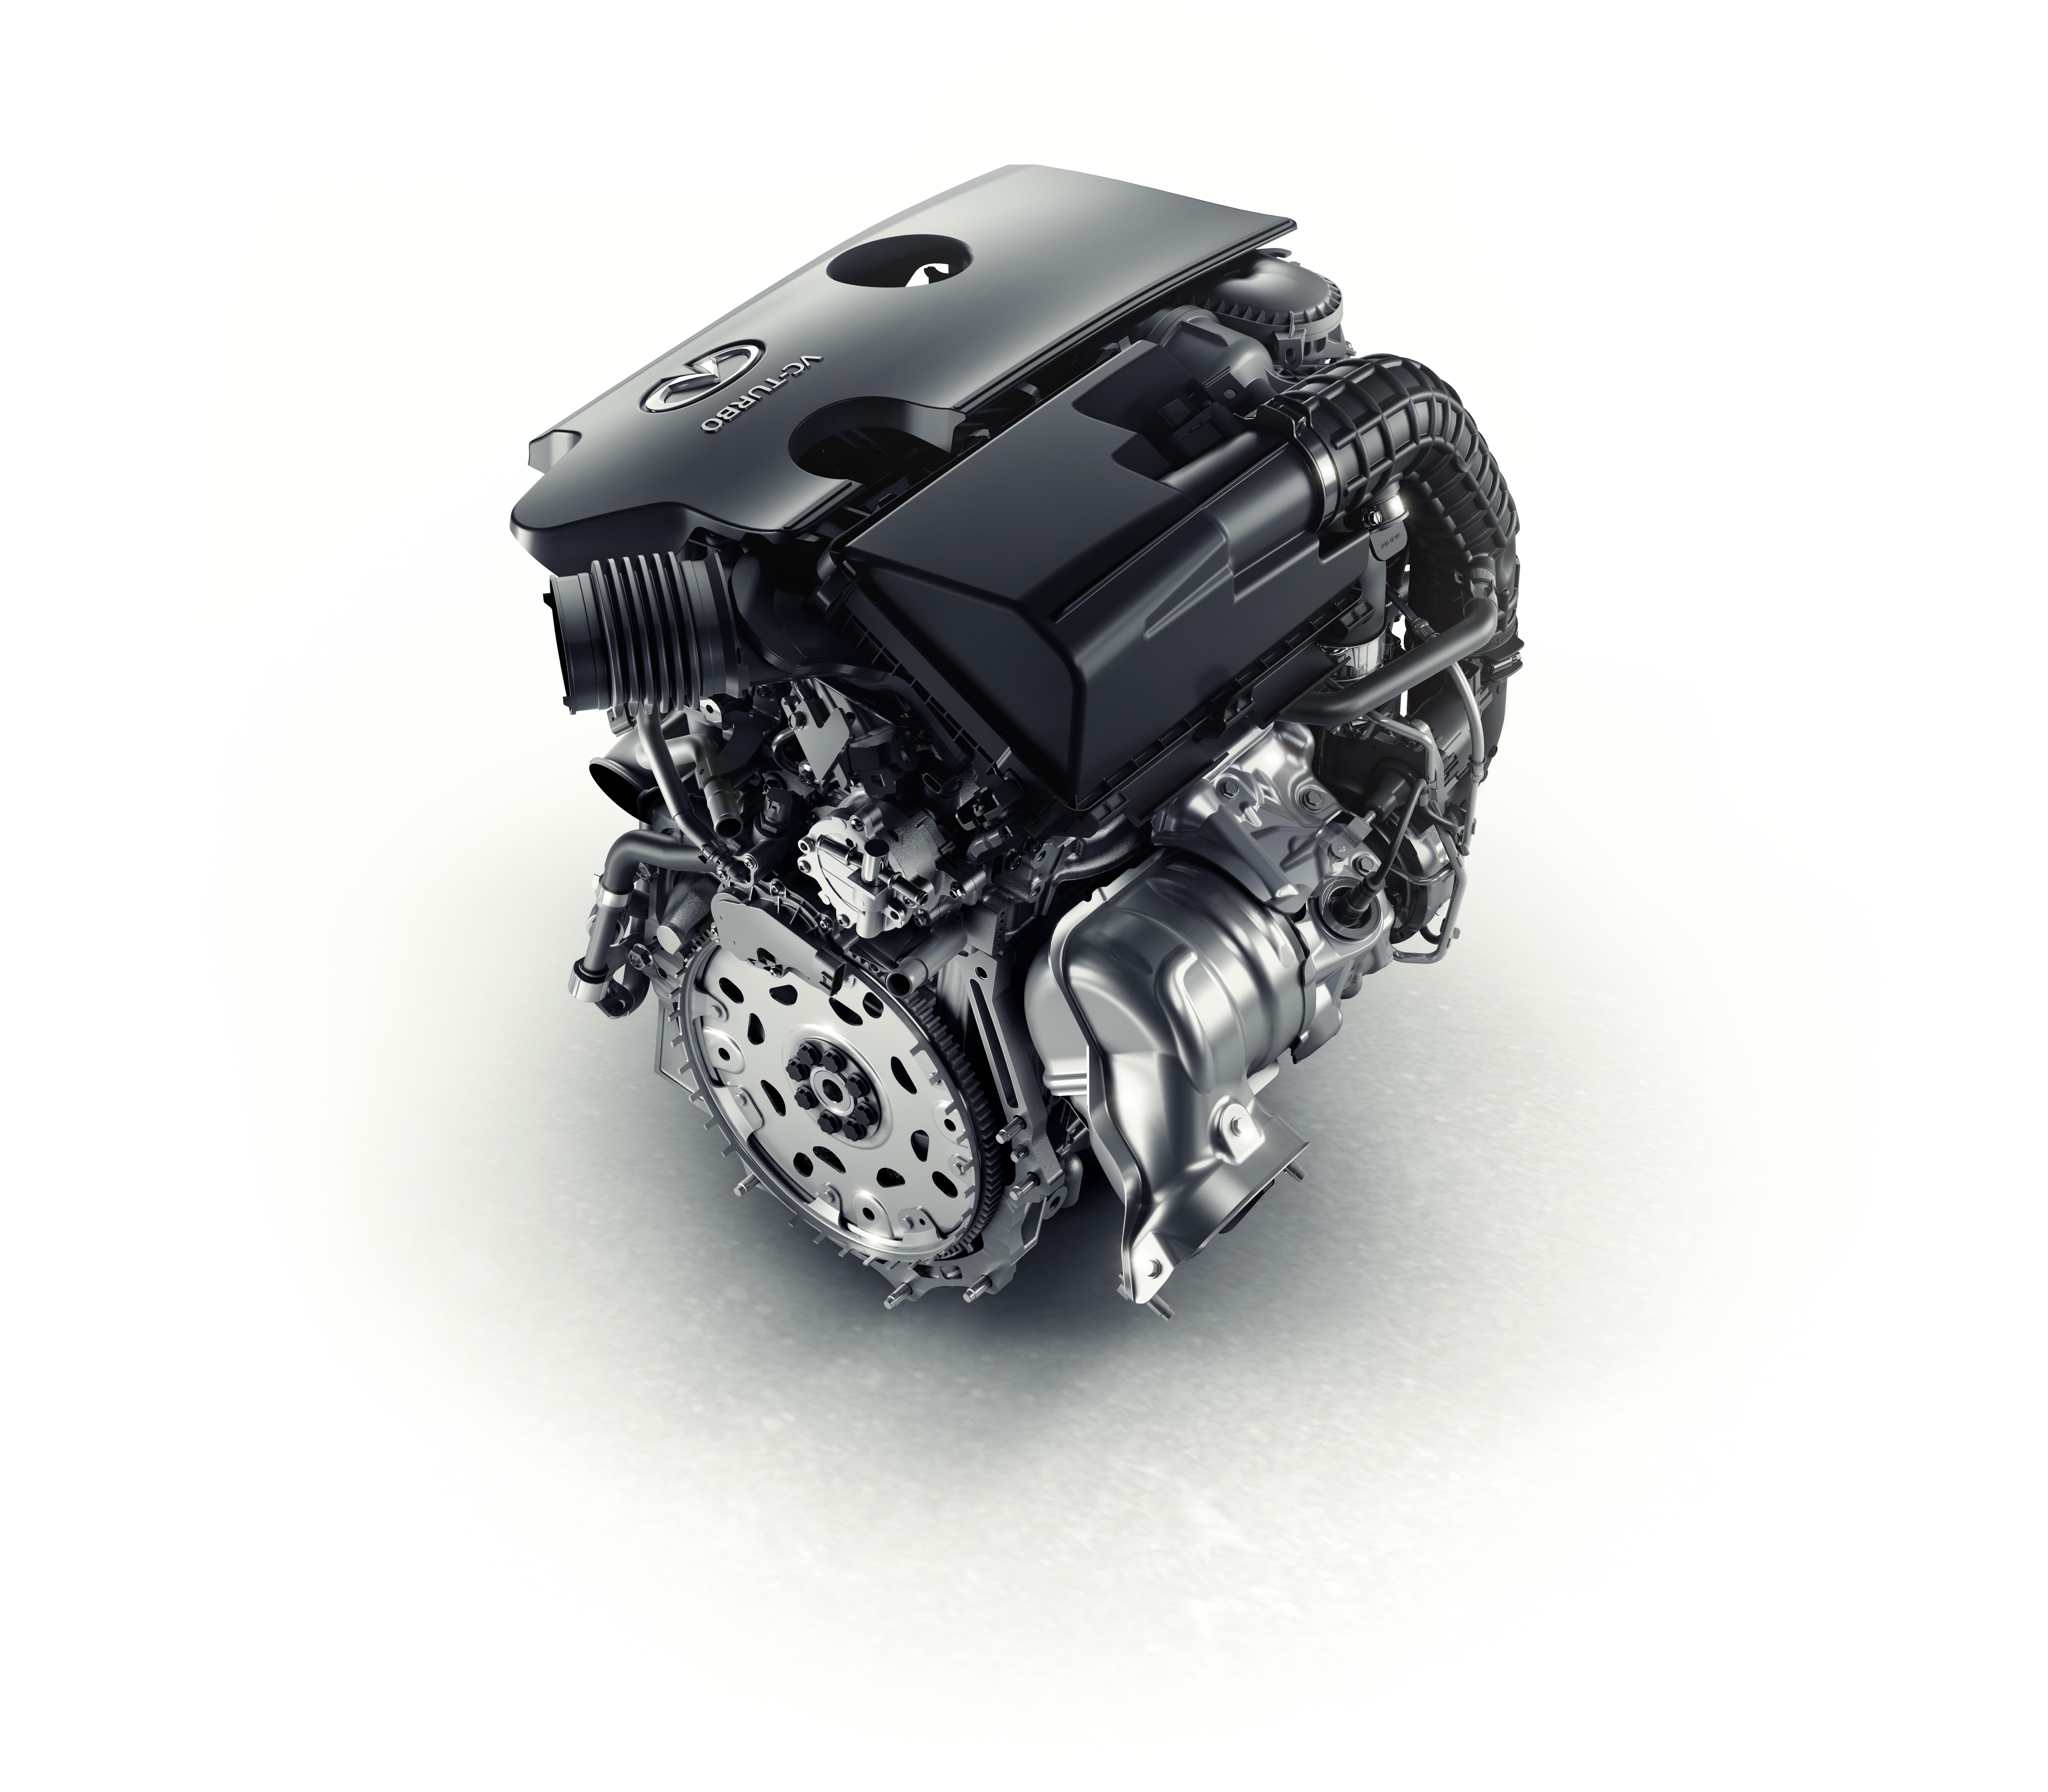 Infinitis VC-Turbo is One of the Ten Best Engines of 2019